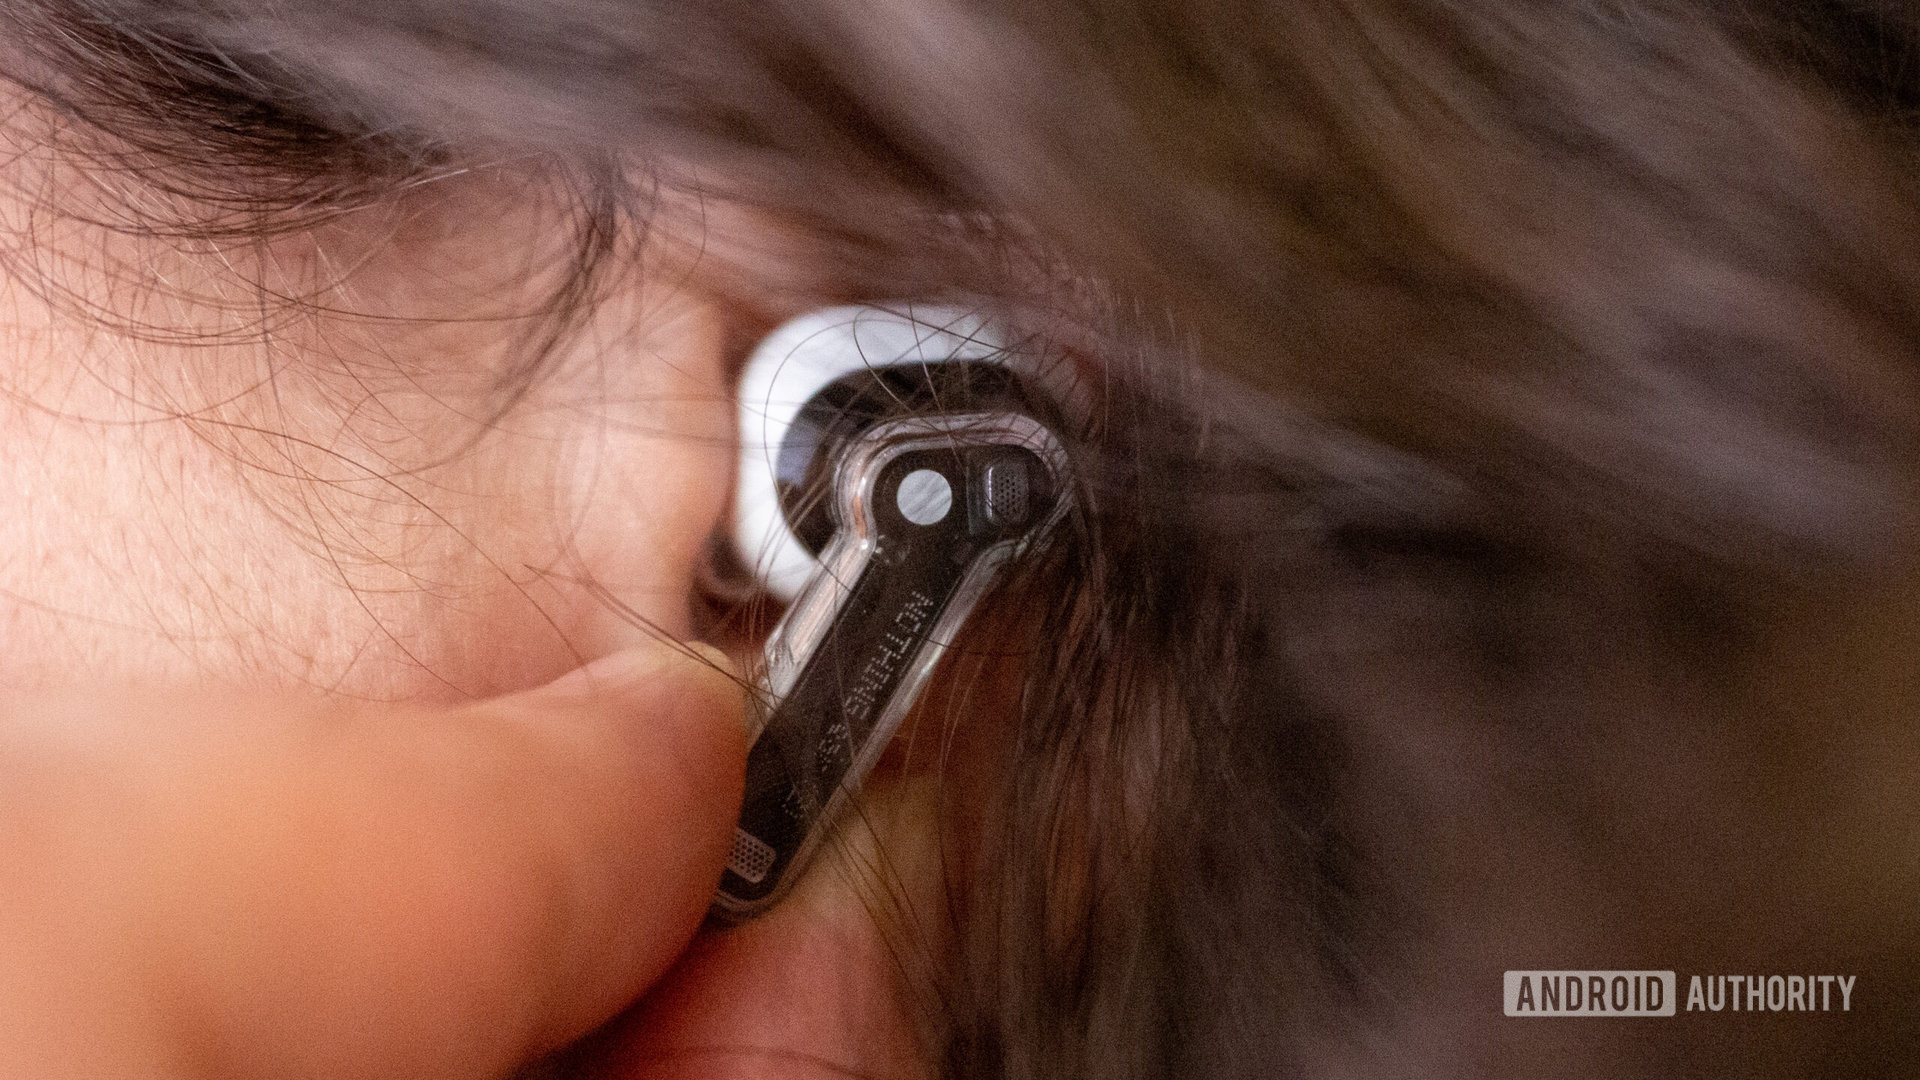 Long hair, don’t care: Squeeze controls are awesome on wireless earbuds